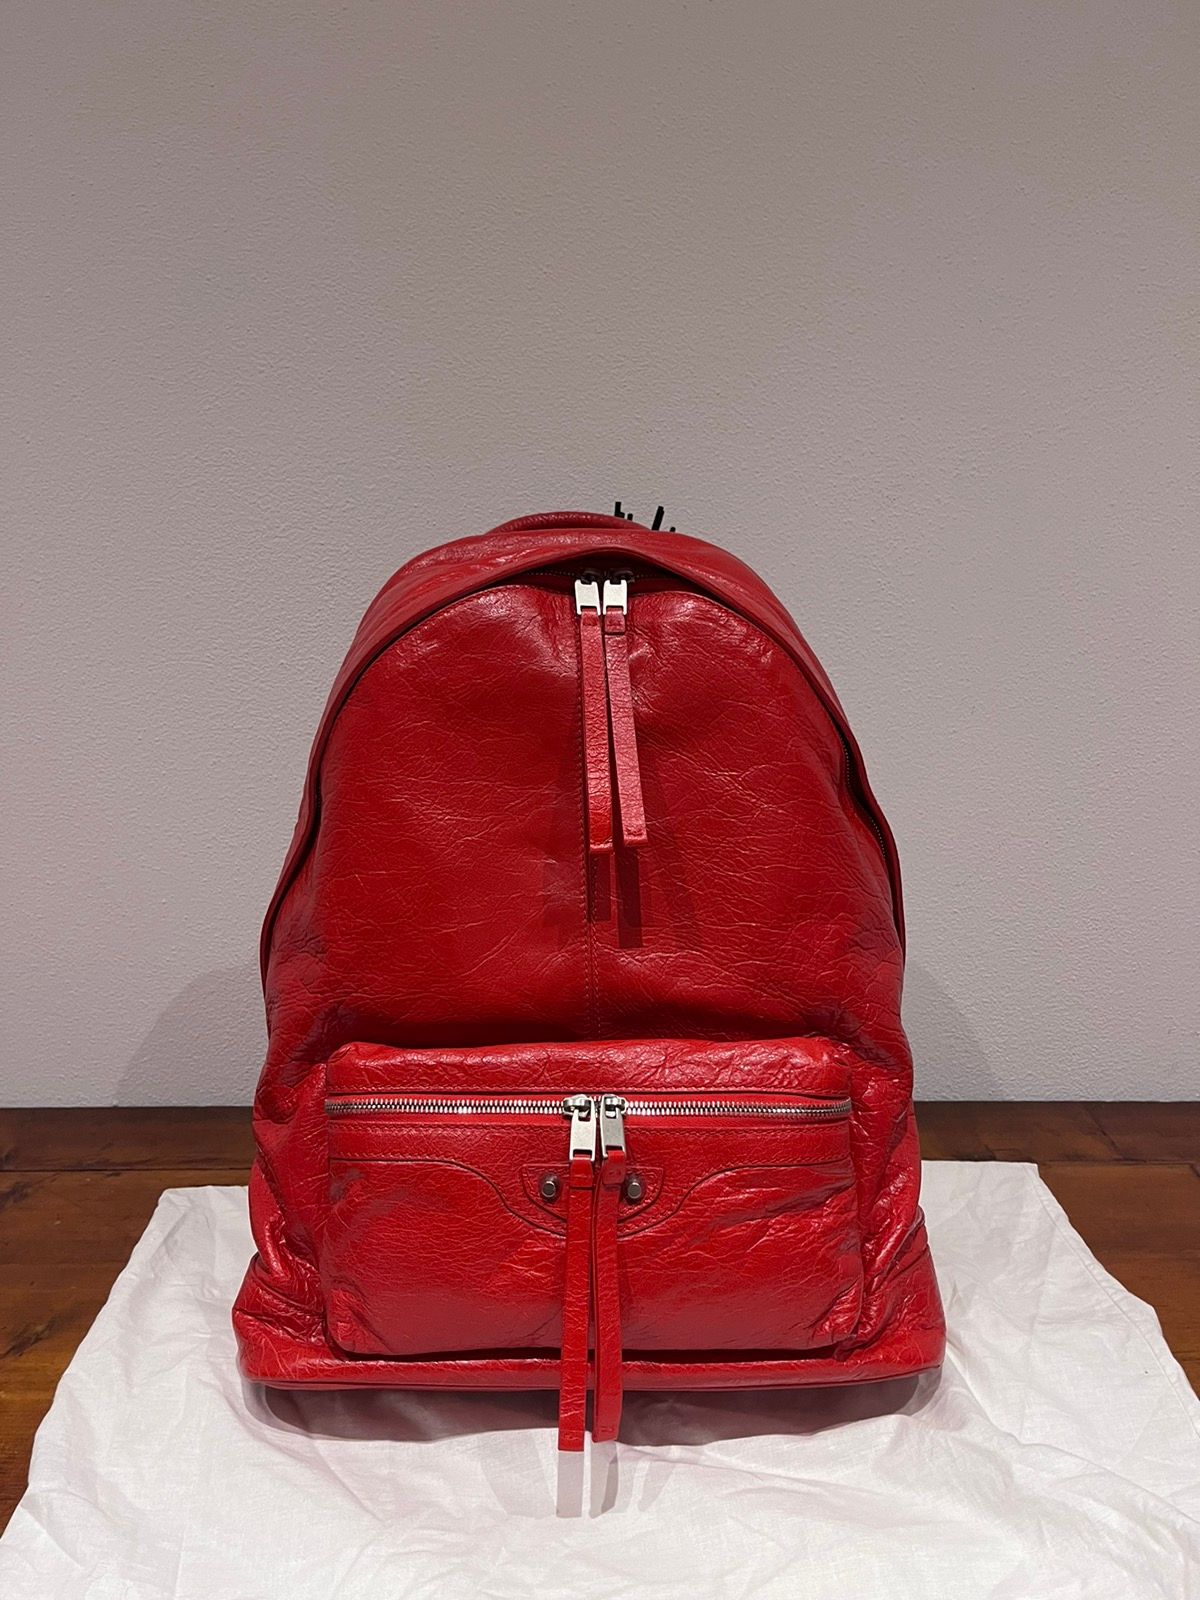 Pre-owned Balenciaga New  City Red Leather Backpack $2400